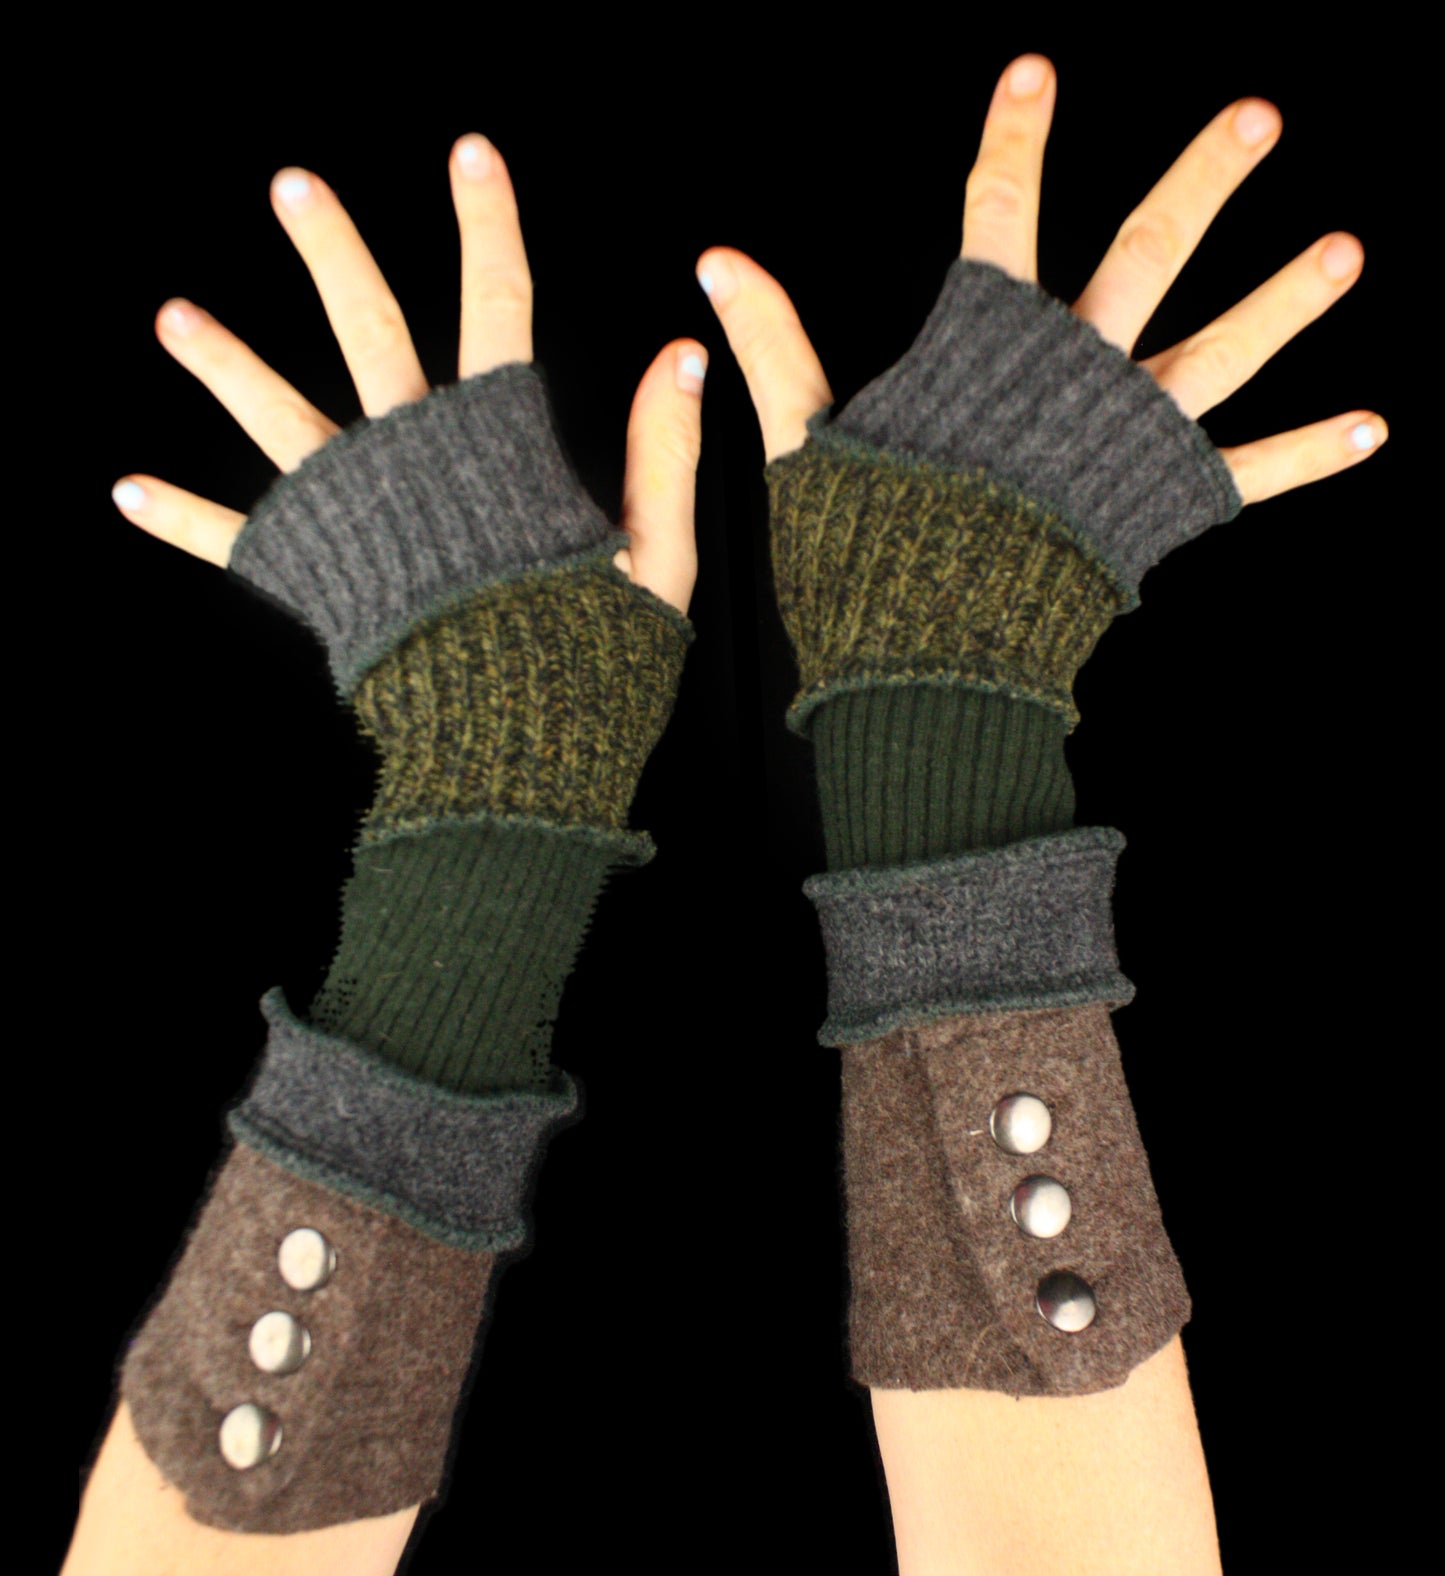 Arm Warmers - made from upcycled sweaters